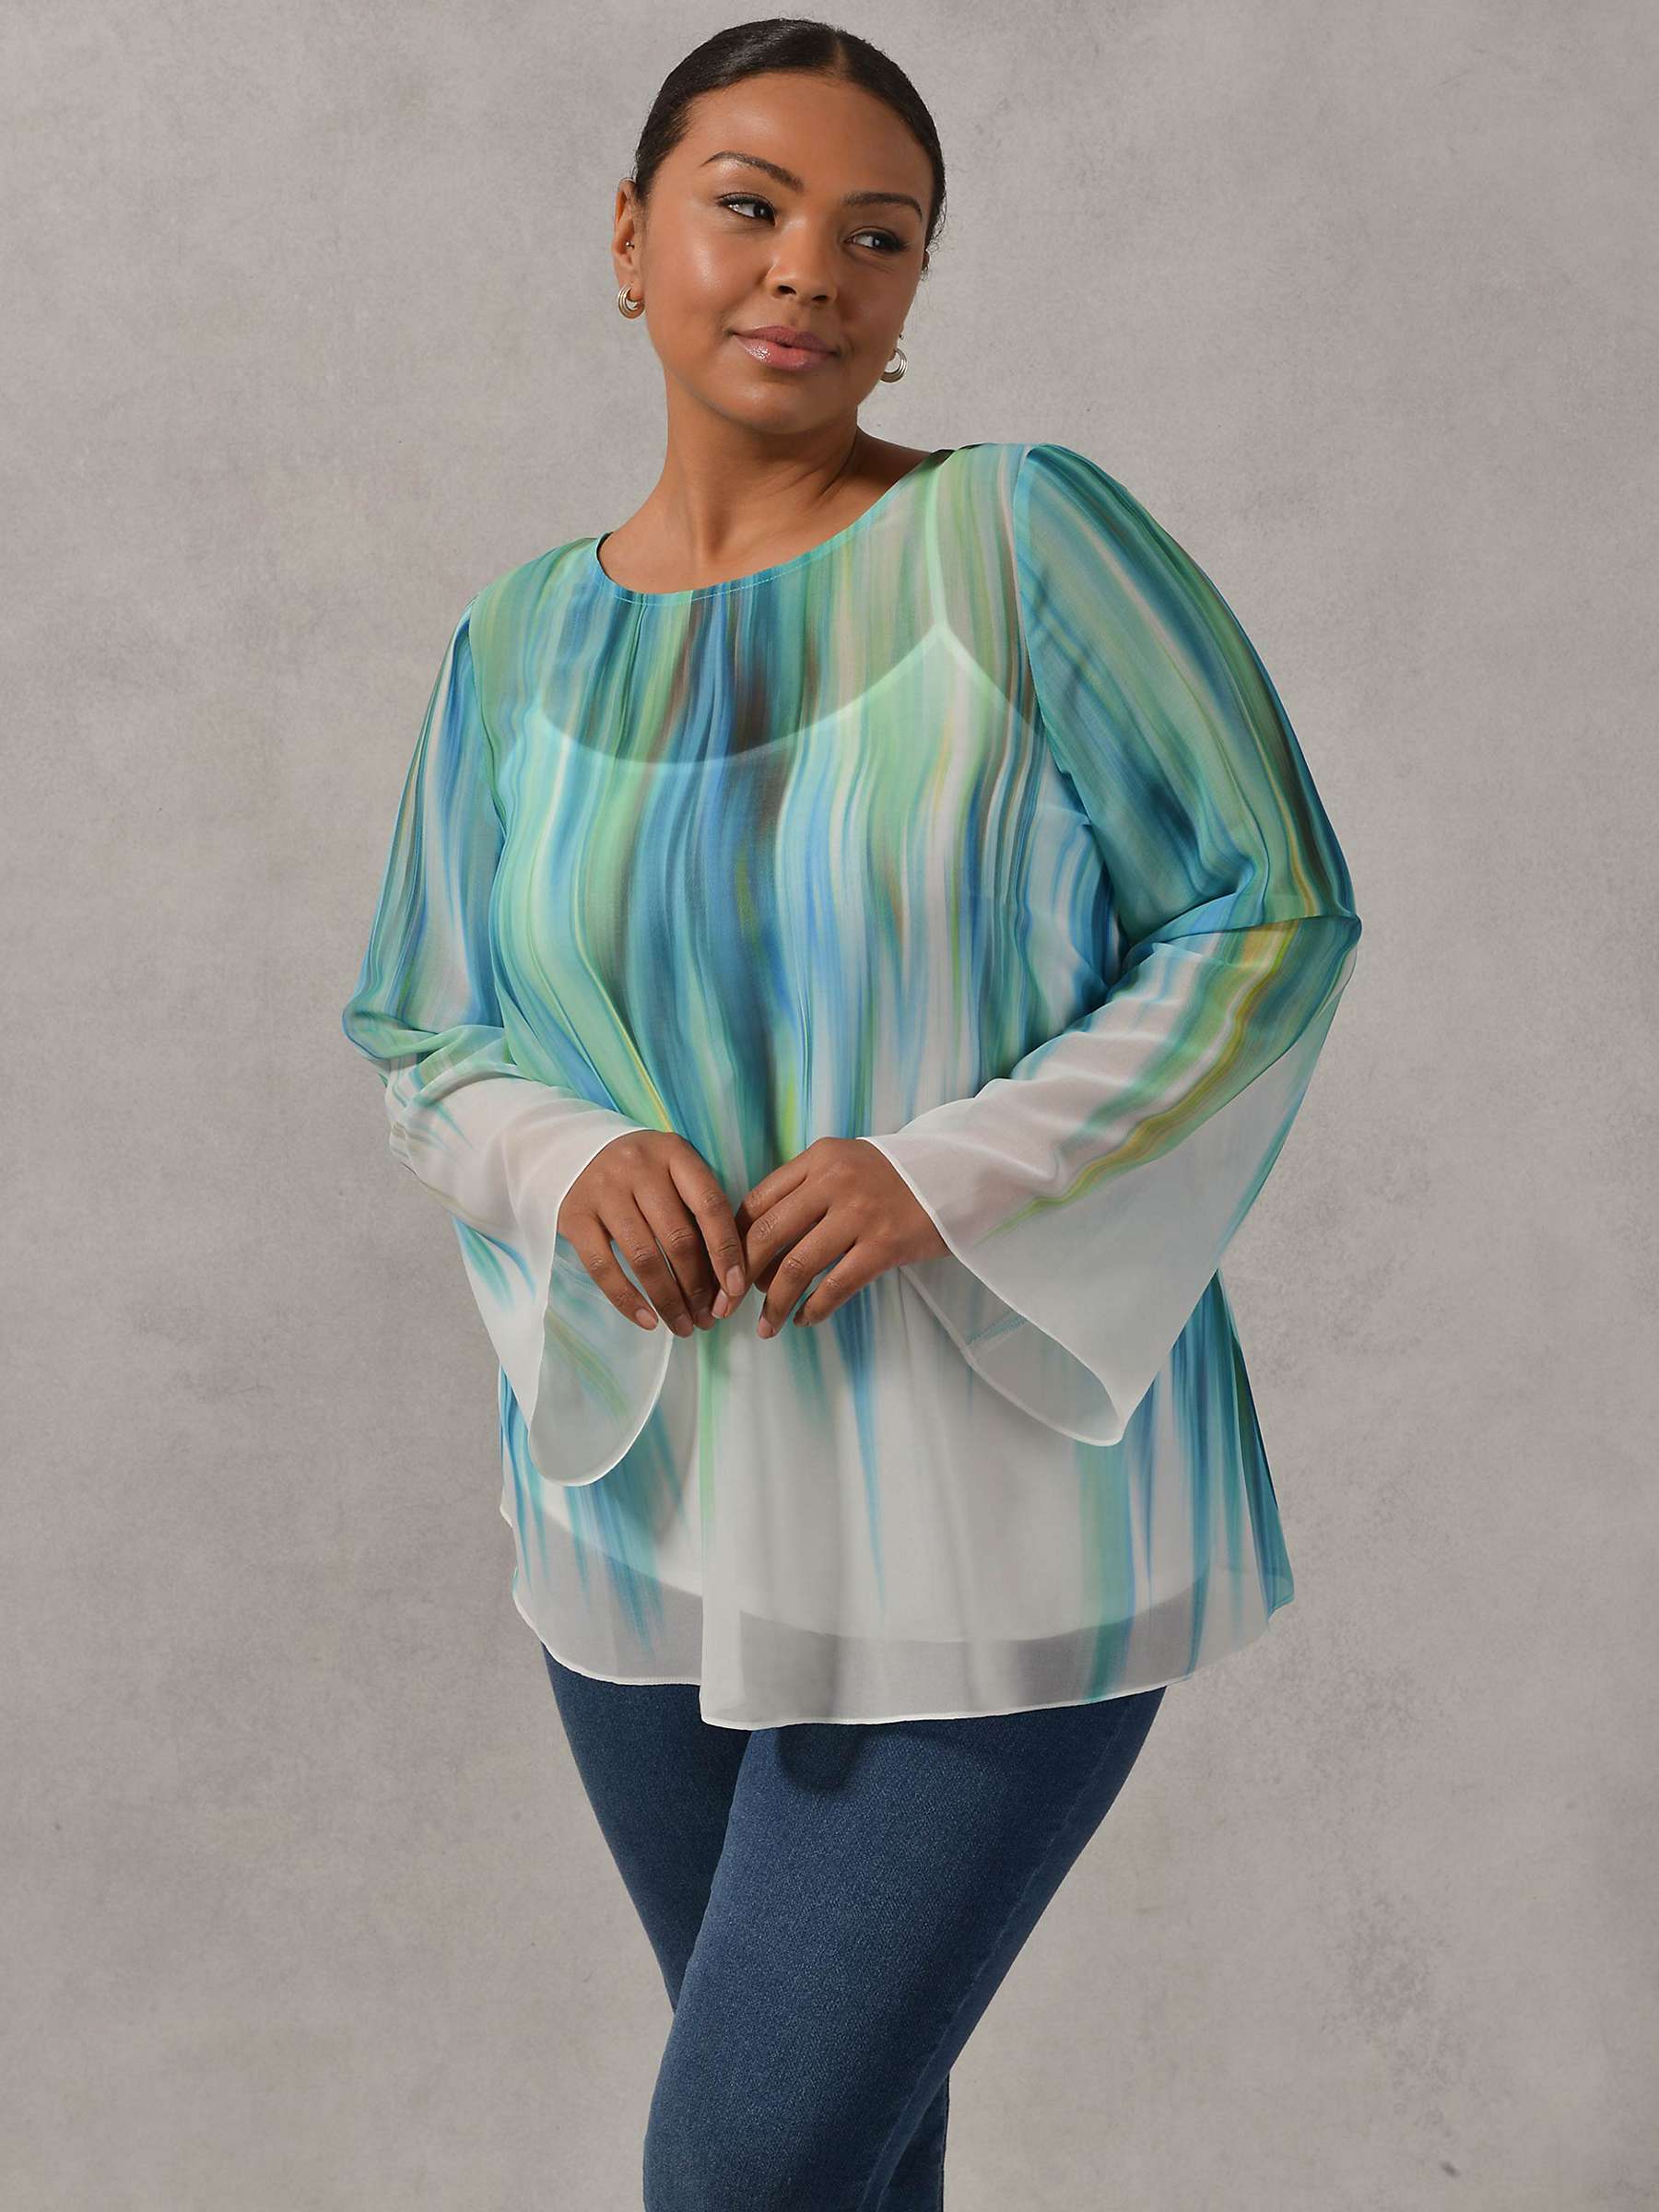 Buy Live Unlimited Ombre High Low Chiffon Under Cami Top, Blue Online at johnlewis.com